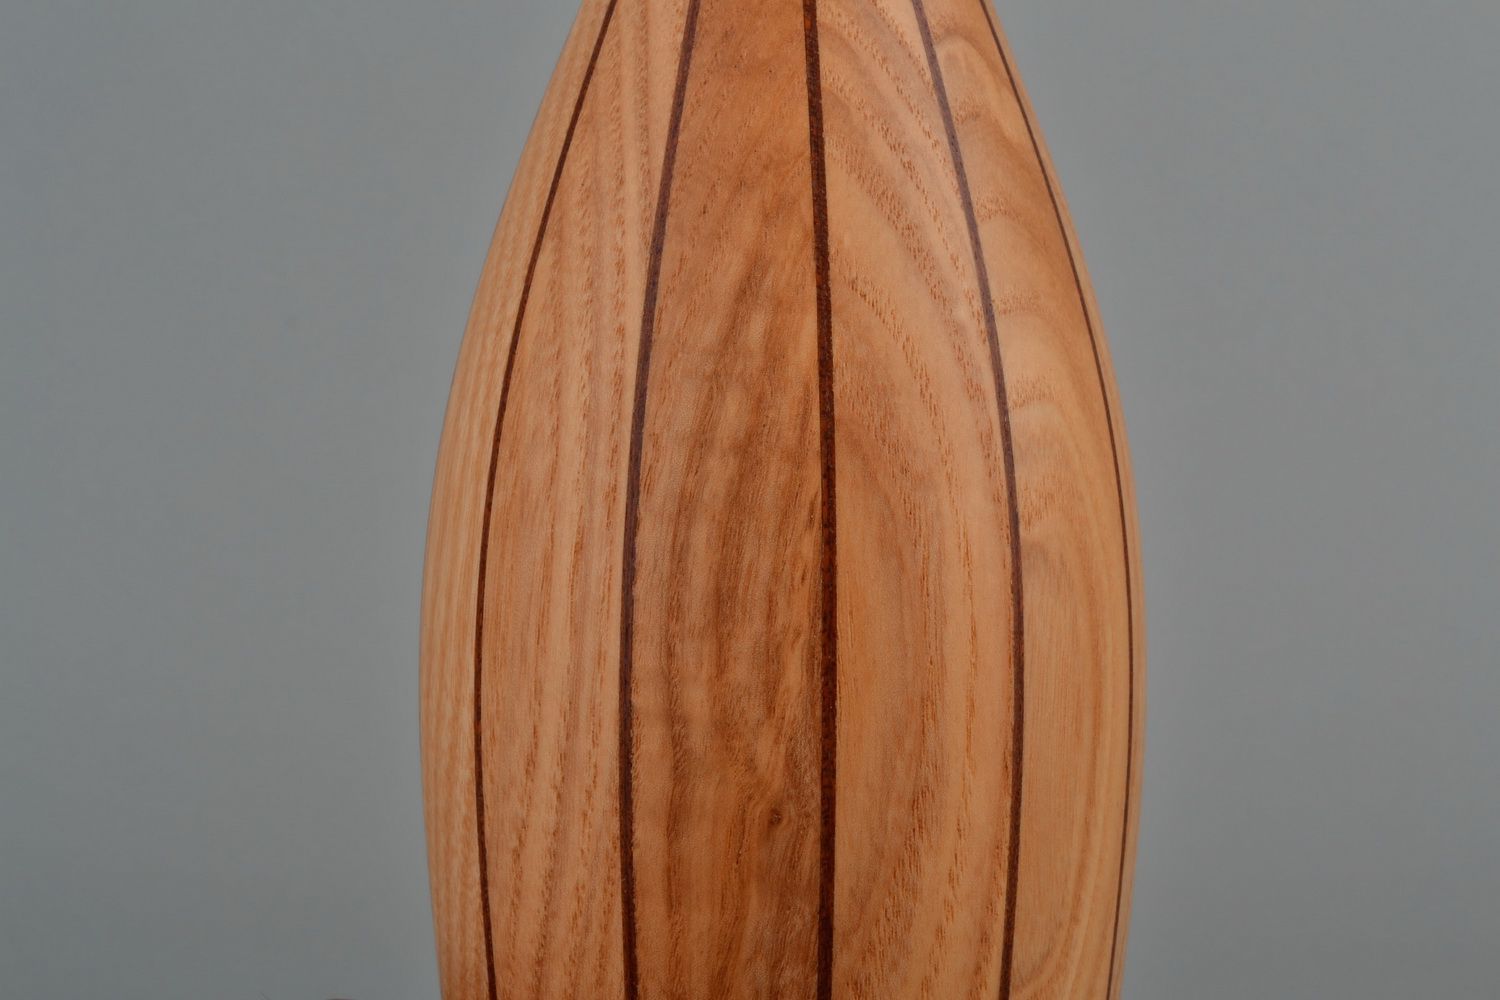 Maple wood 10 inches vase with inserts made using segmentation technique 1,1 lb photo 3